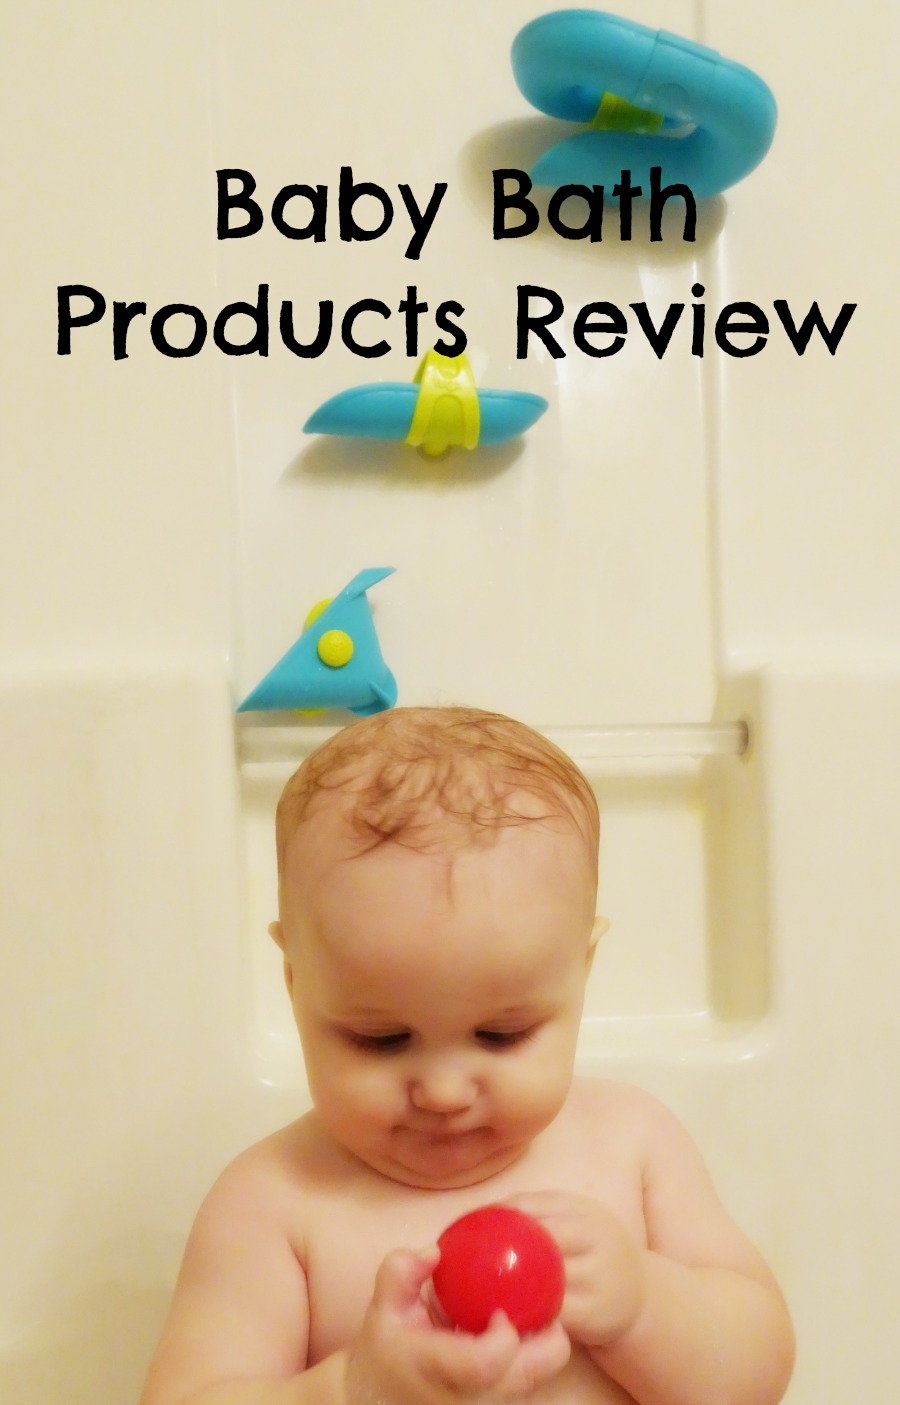 Baby Bath Products Review